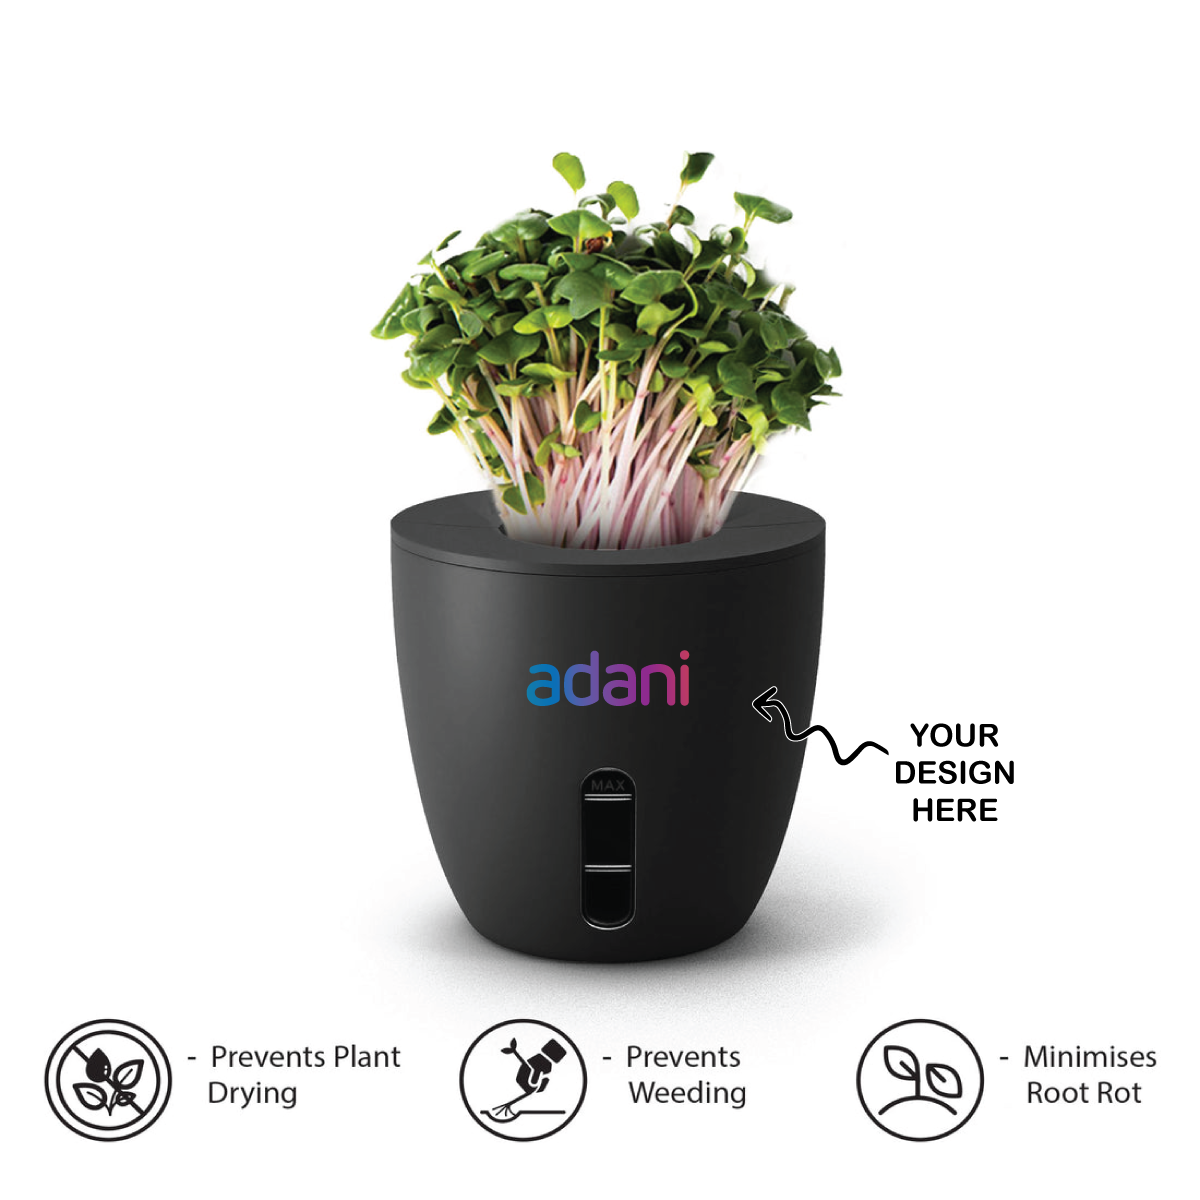 Personalized Self Watering Plant Pot - For Employee Joining Kit, Corporate Gifting, Return Gift, Event Gifts, Promotional Gifting